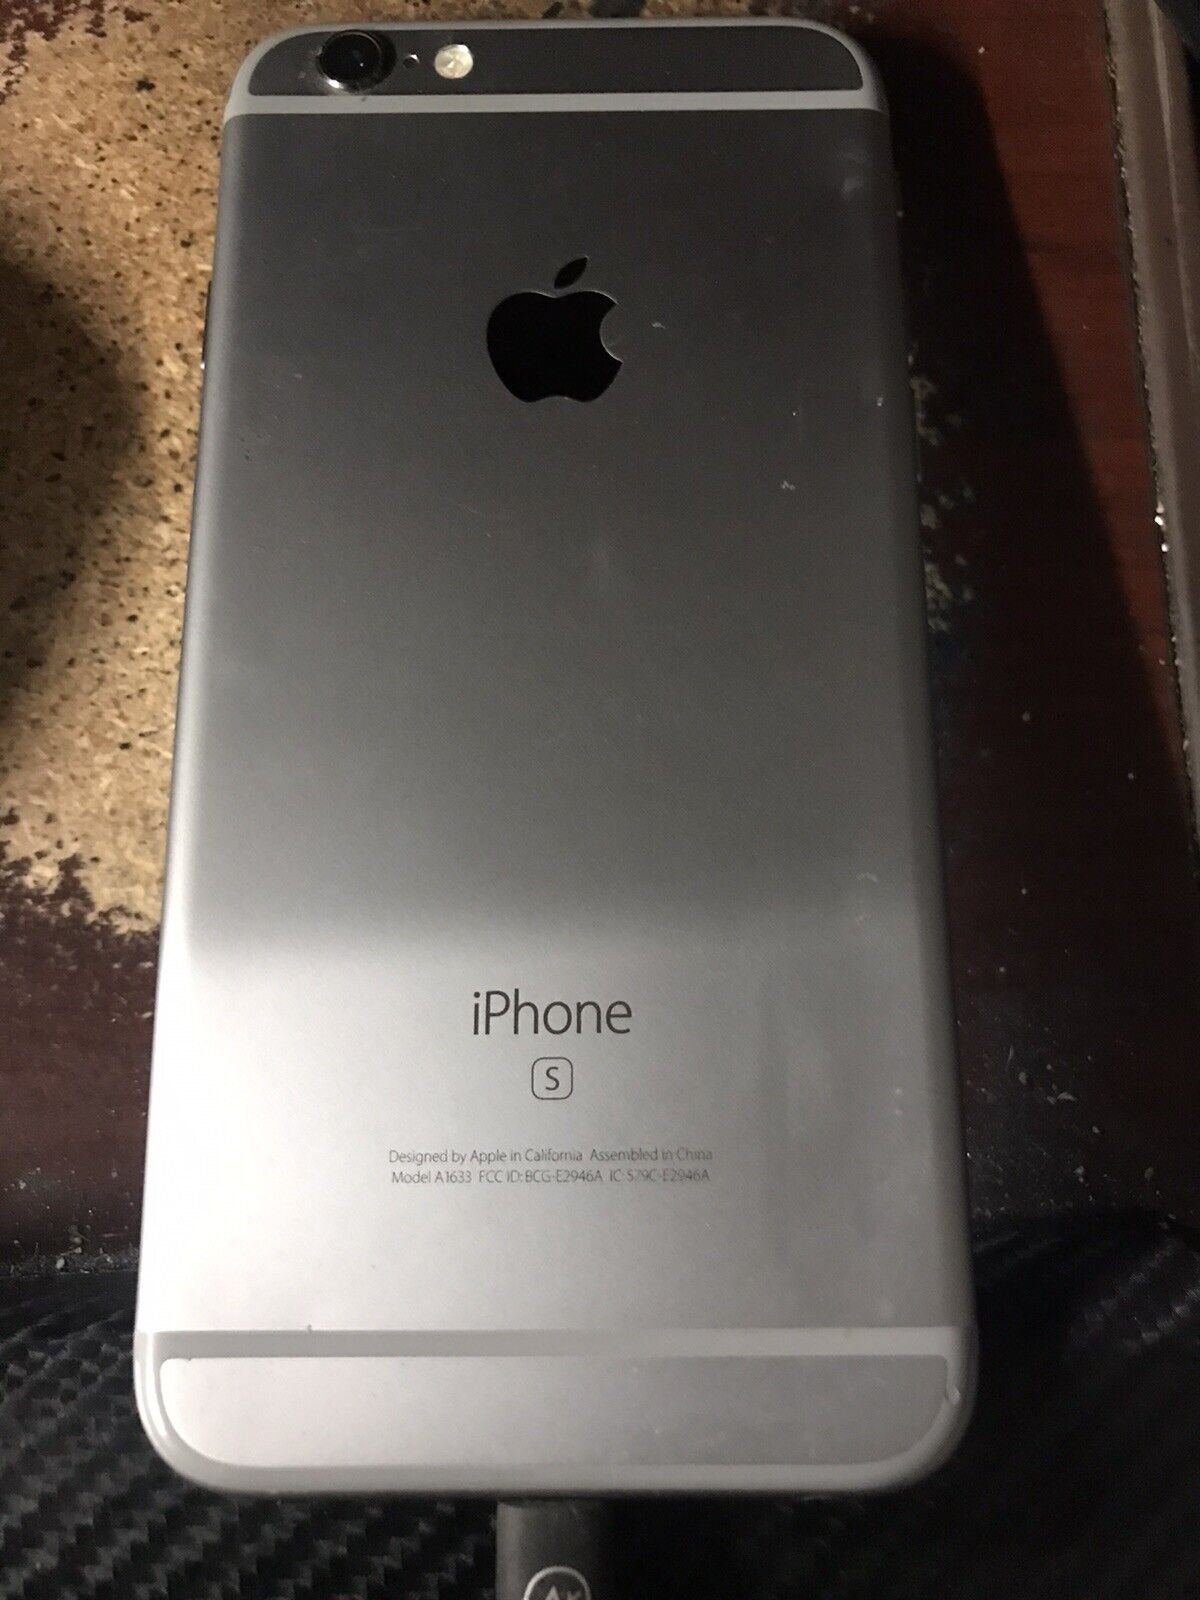 Apple iPhone 6s - 32GB - Silver (Unlocked) A1633 (CDMA + GSM) for 